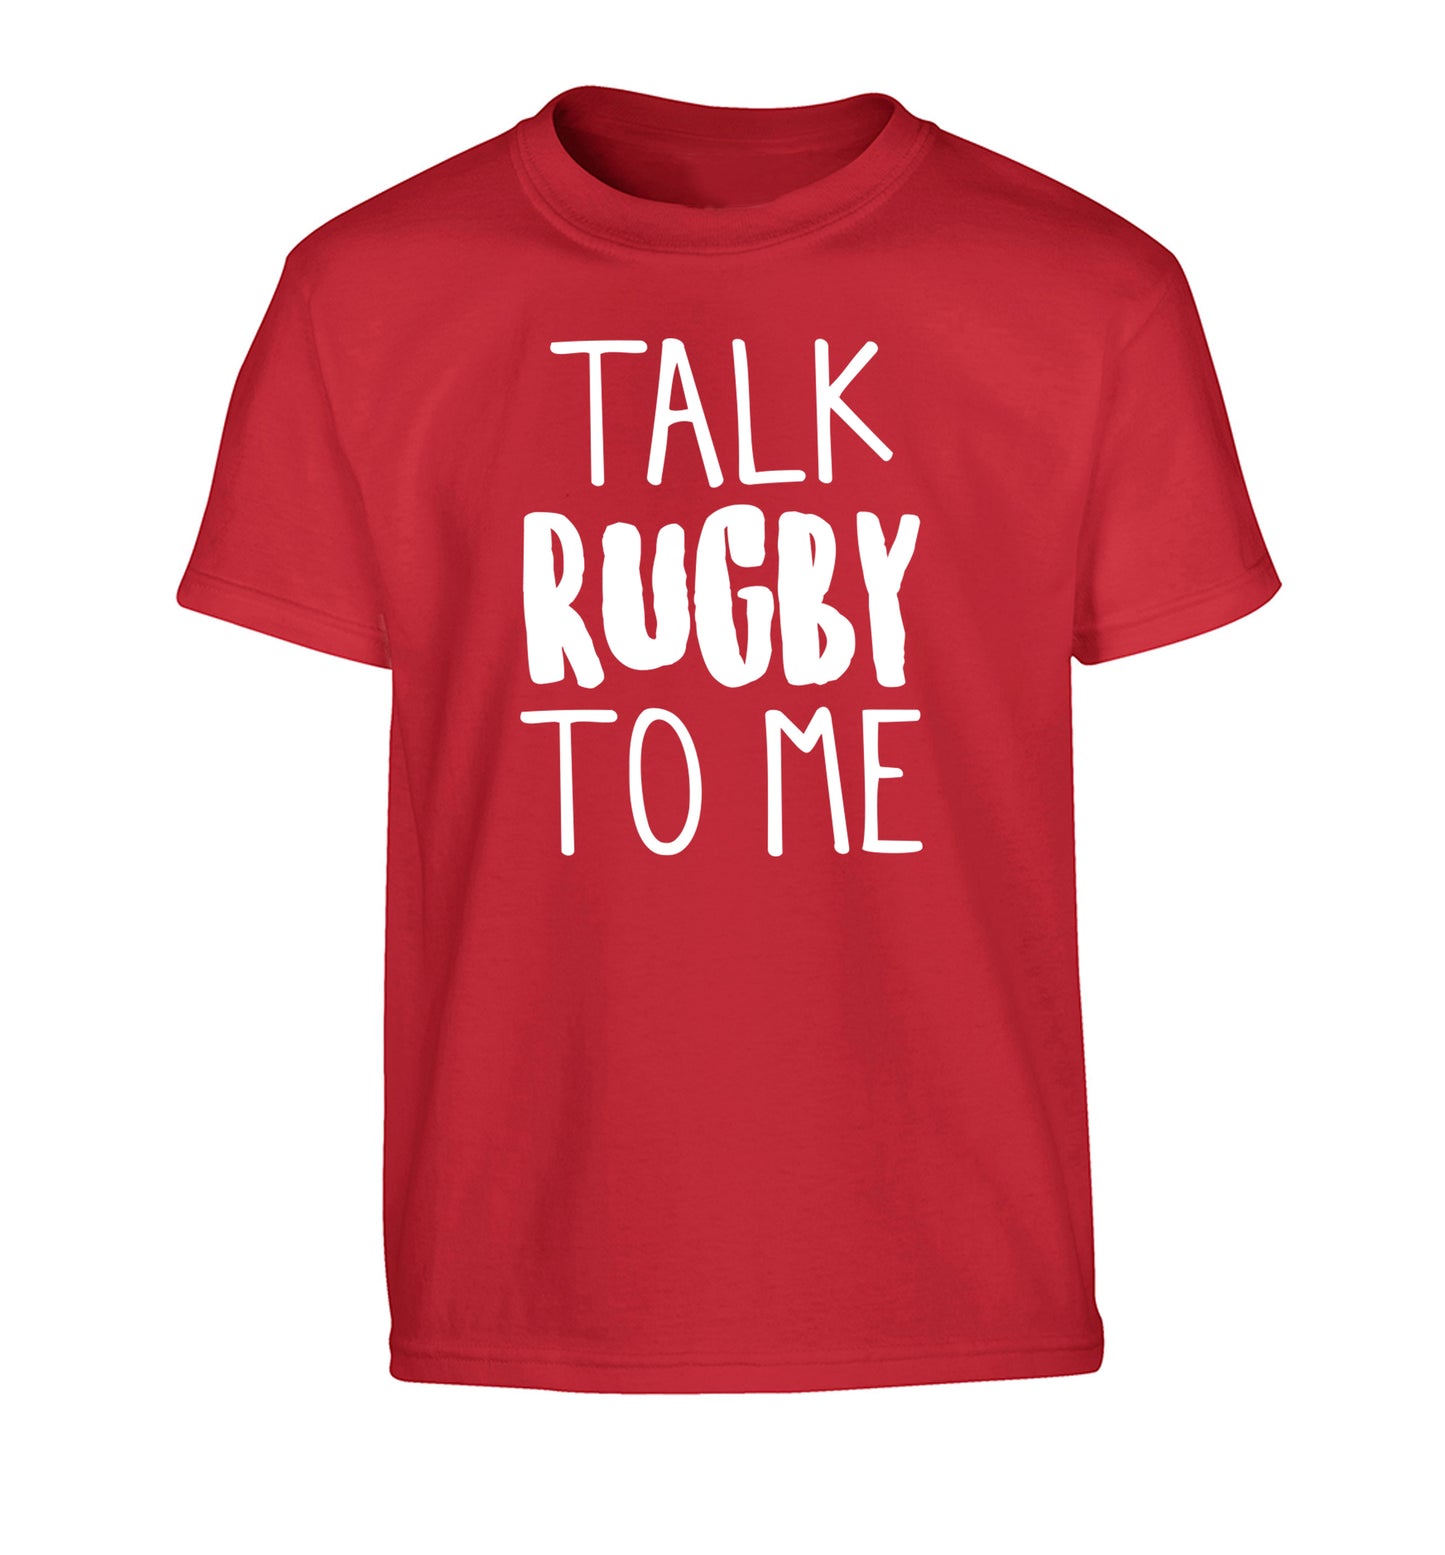 Talk rugby to me Children's red Tshirt 12-13 Years